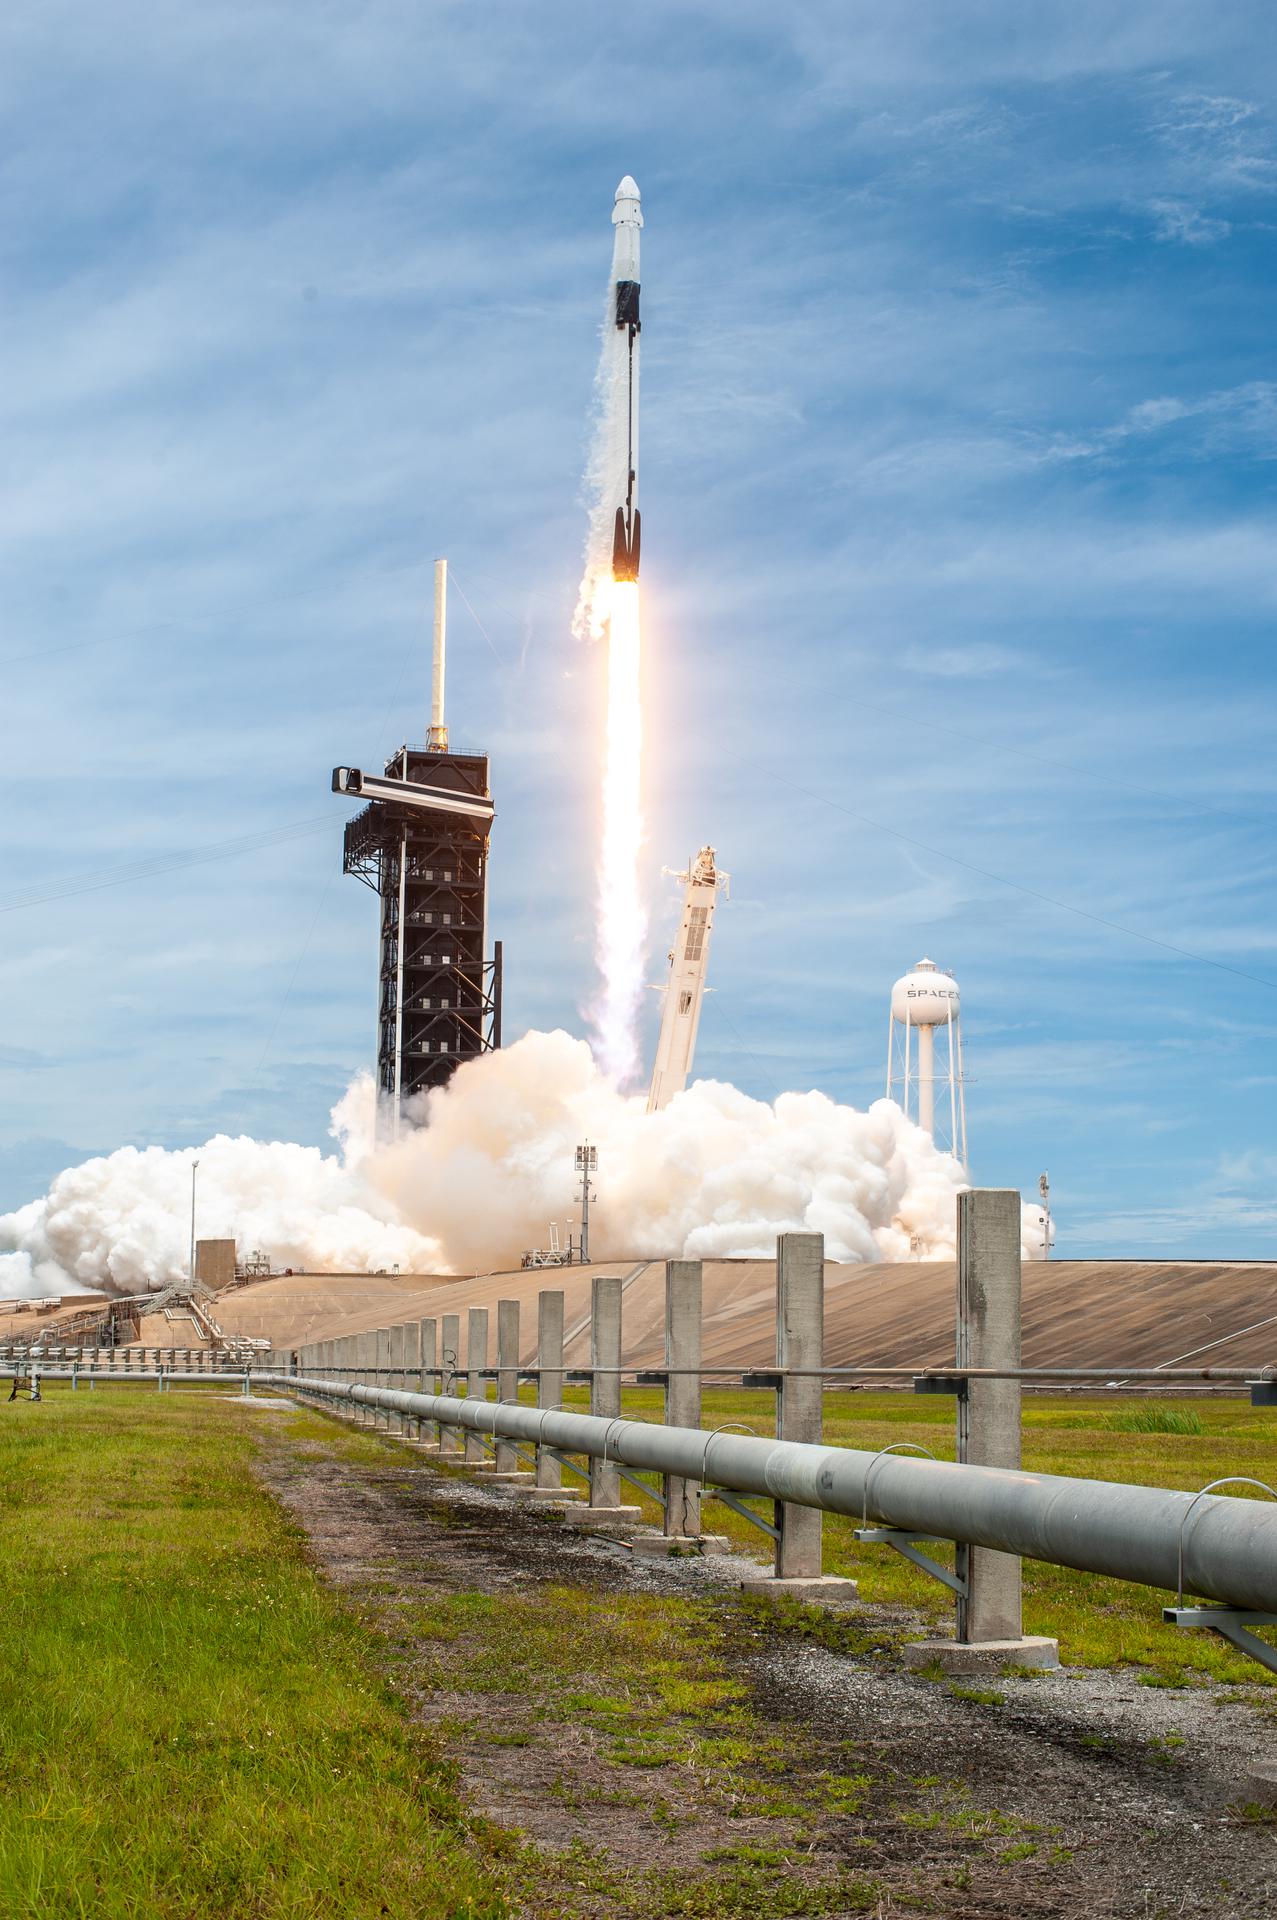 SpaceX's CRS-22 mission lifts off